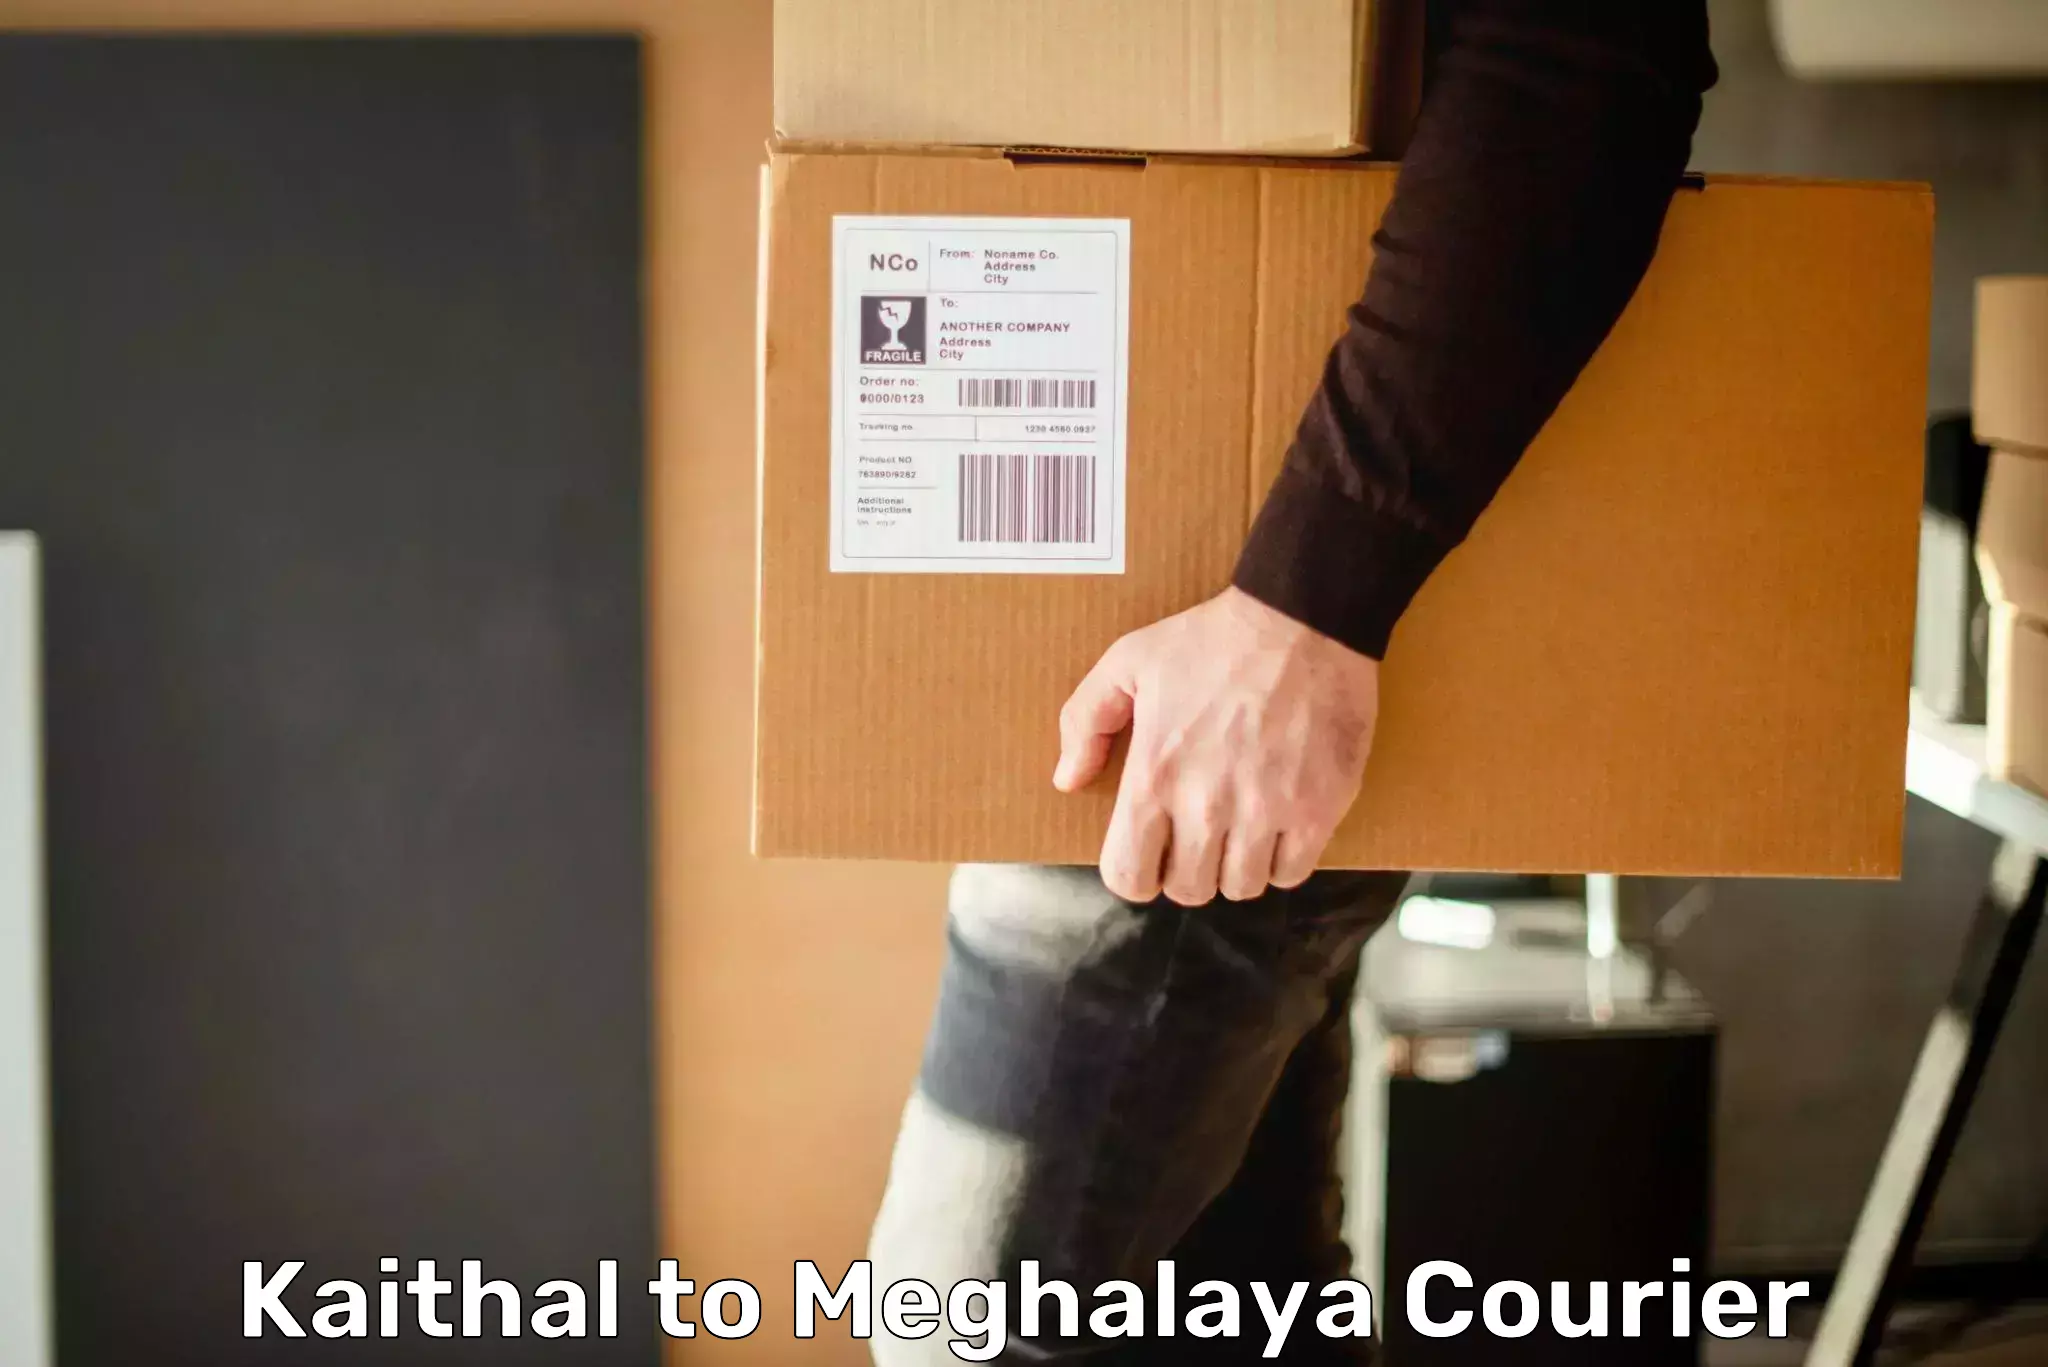 Doorstep delivery service Kaithal to Meghalaya